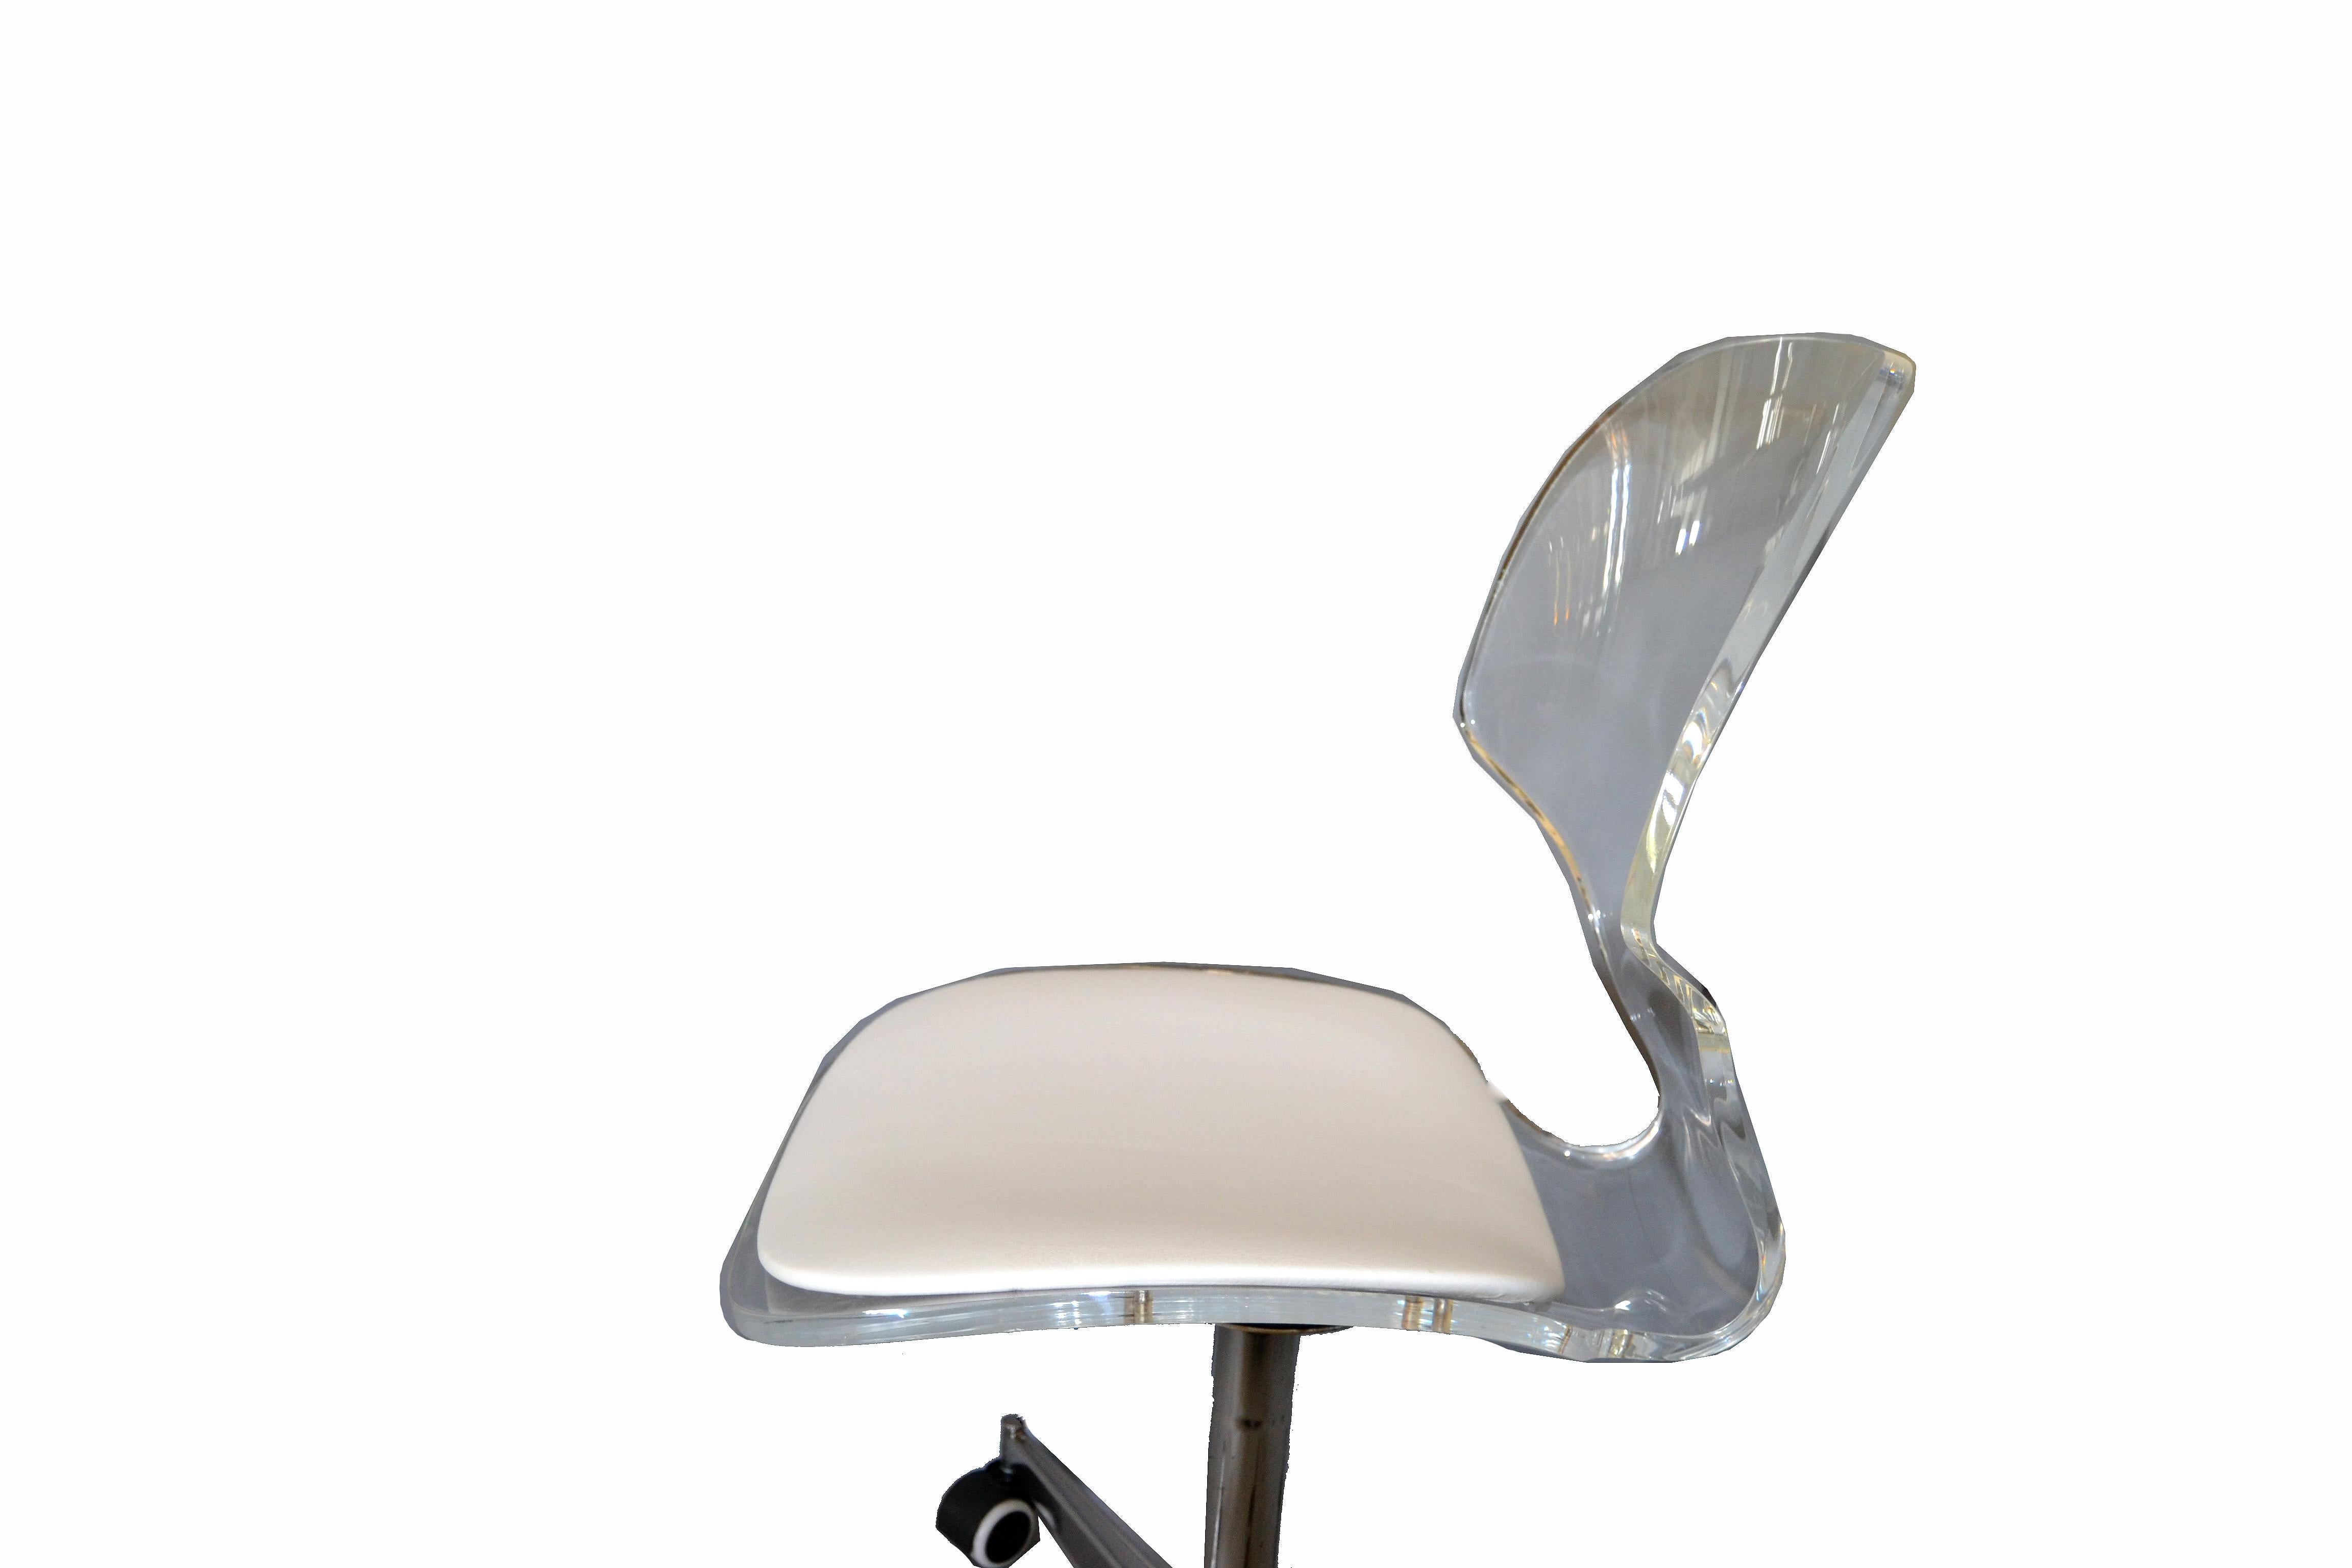 Pair of 1960s Lucite Desk Chairs with Chrome Swivel Base on Casters 3